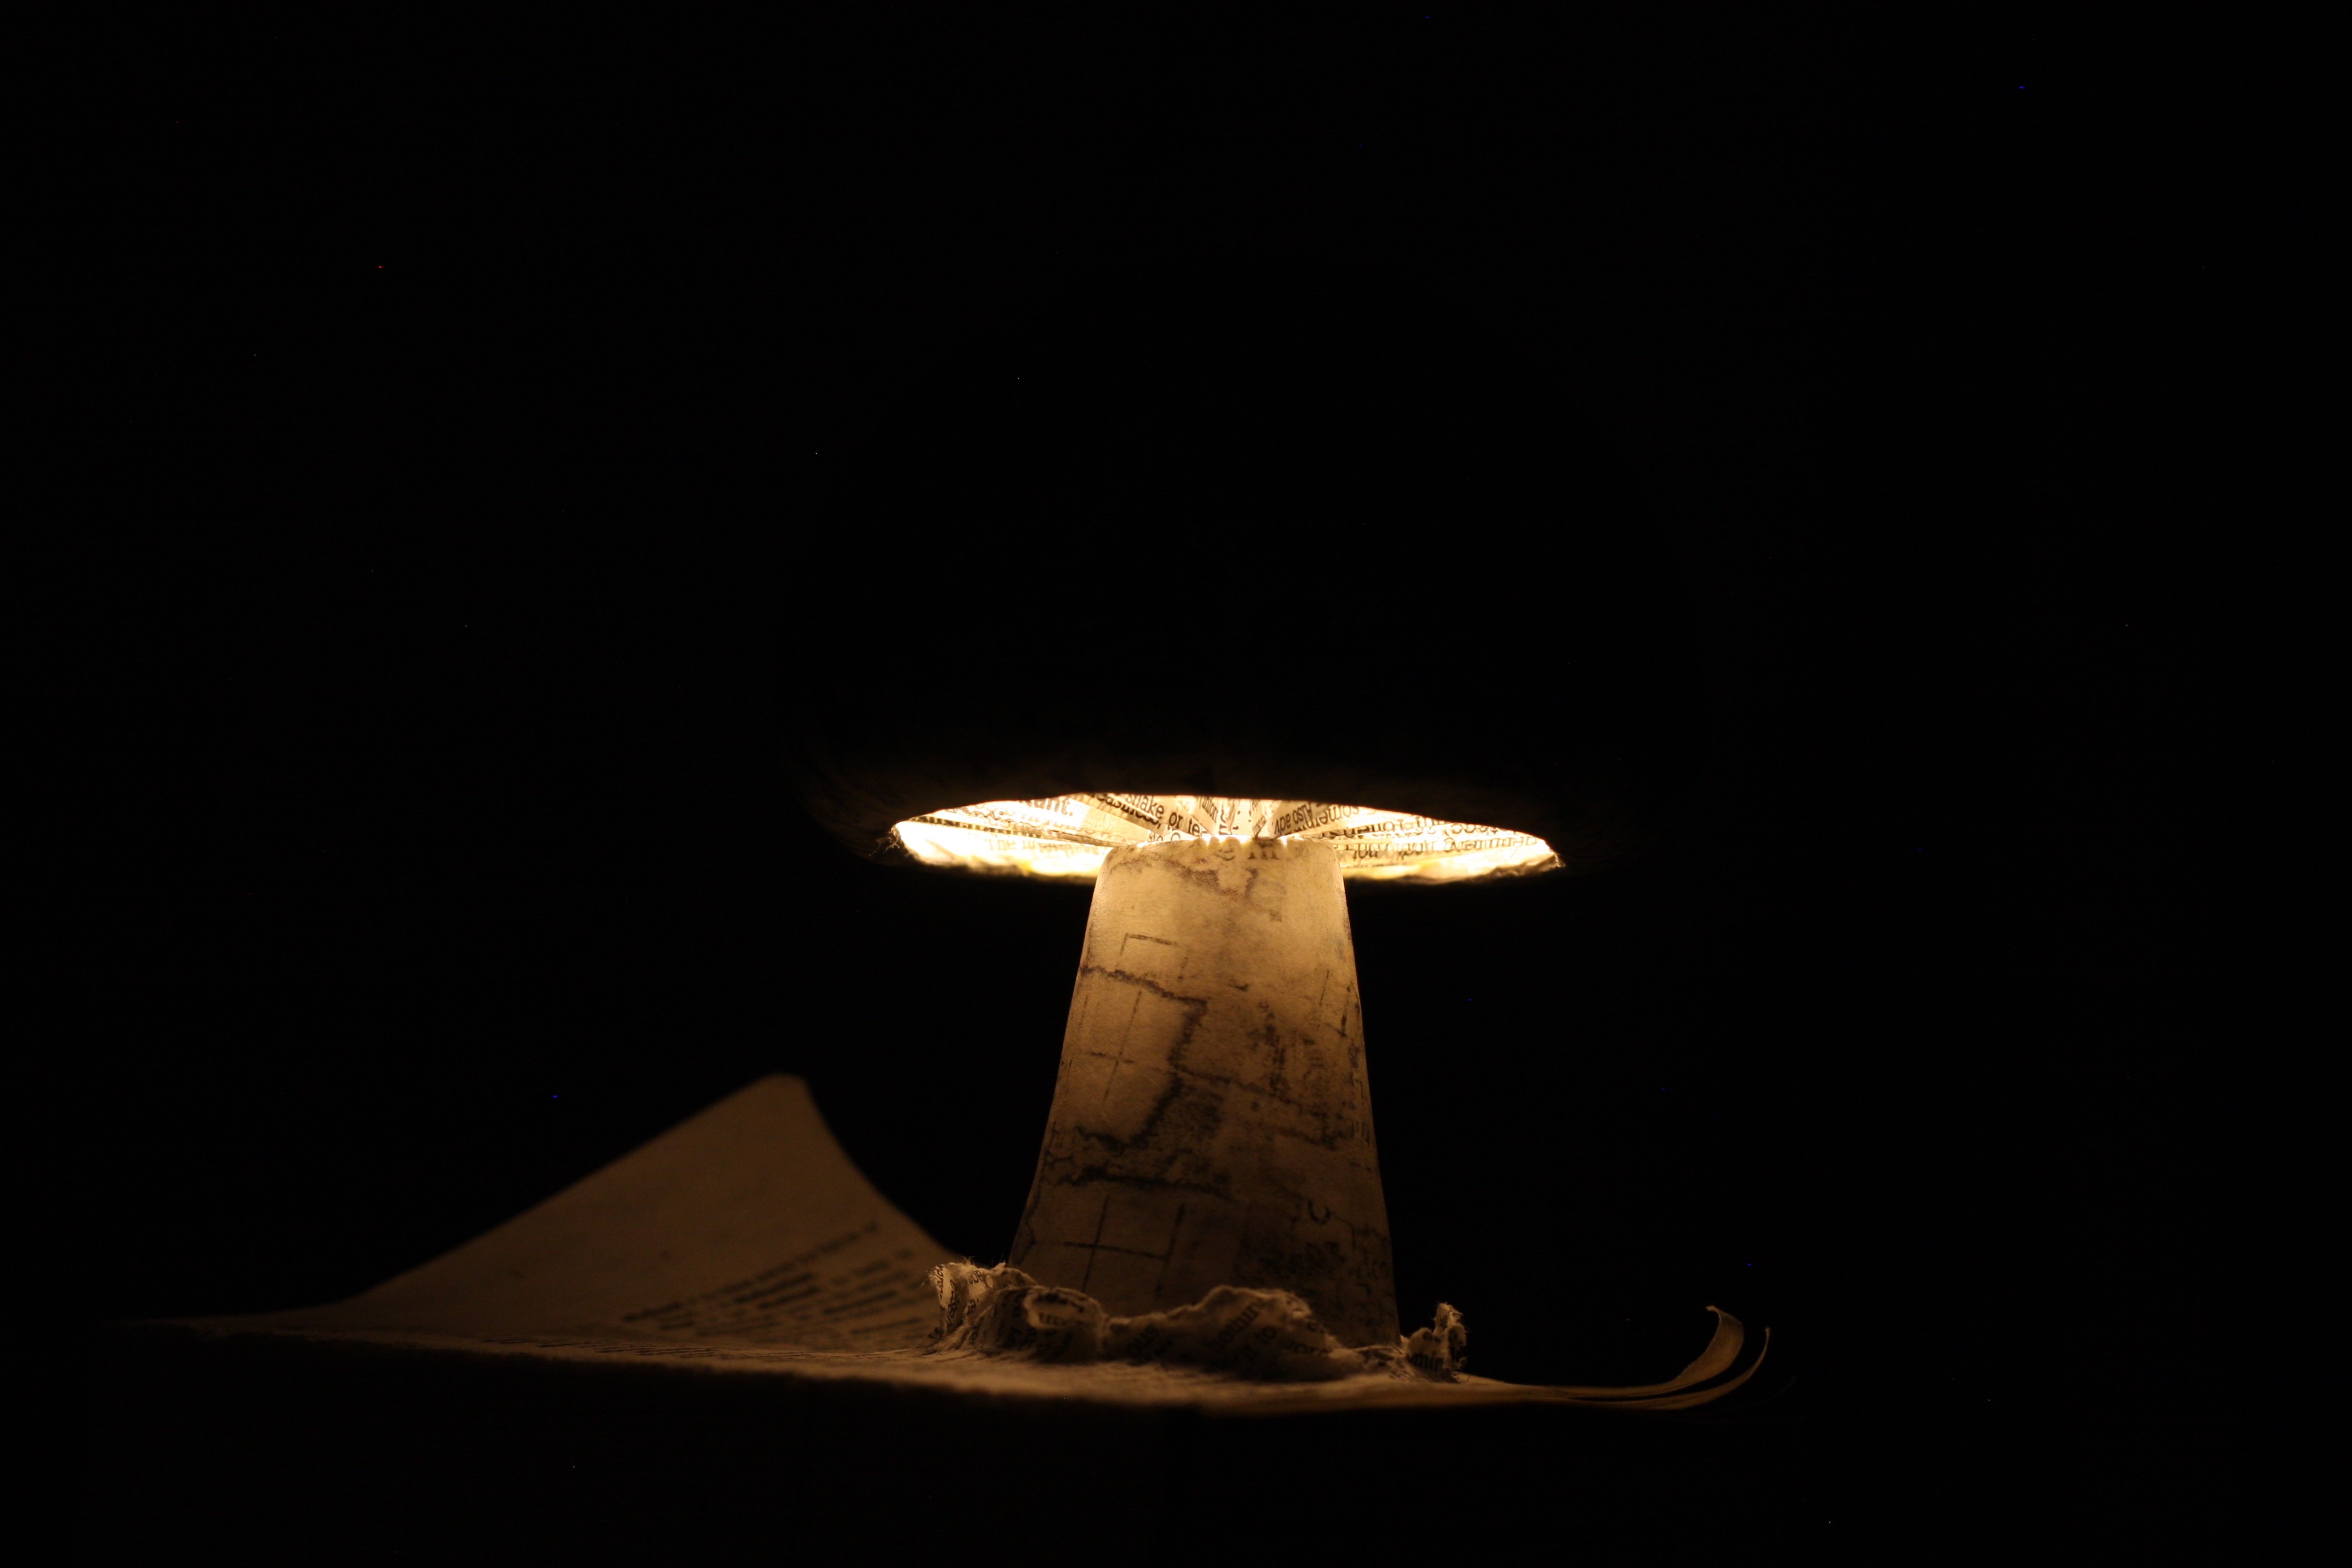 Paper mushroom gills lit, surrounded by darkness